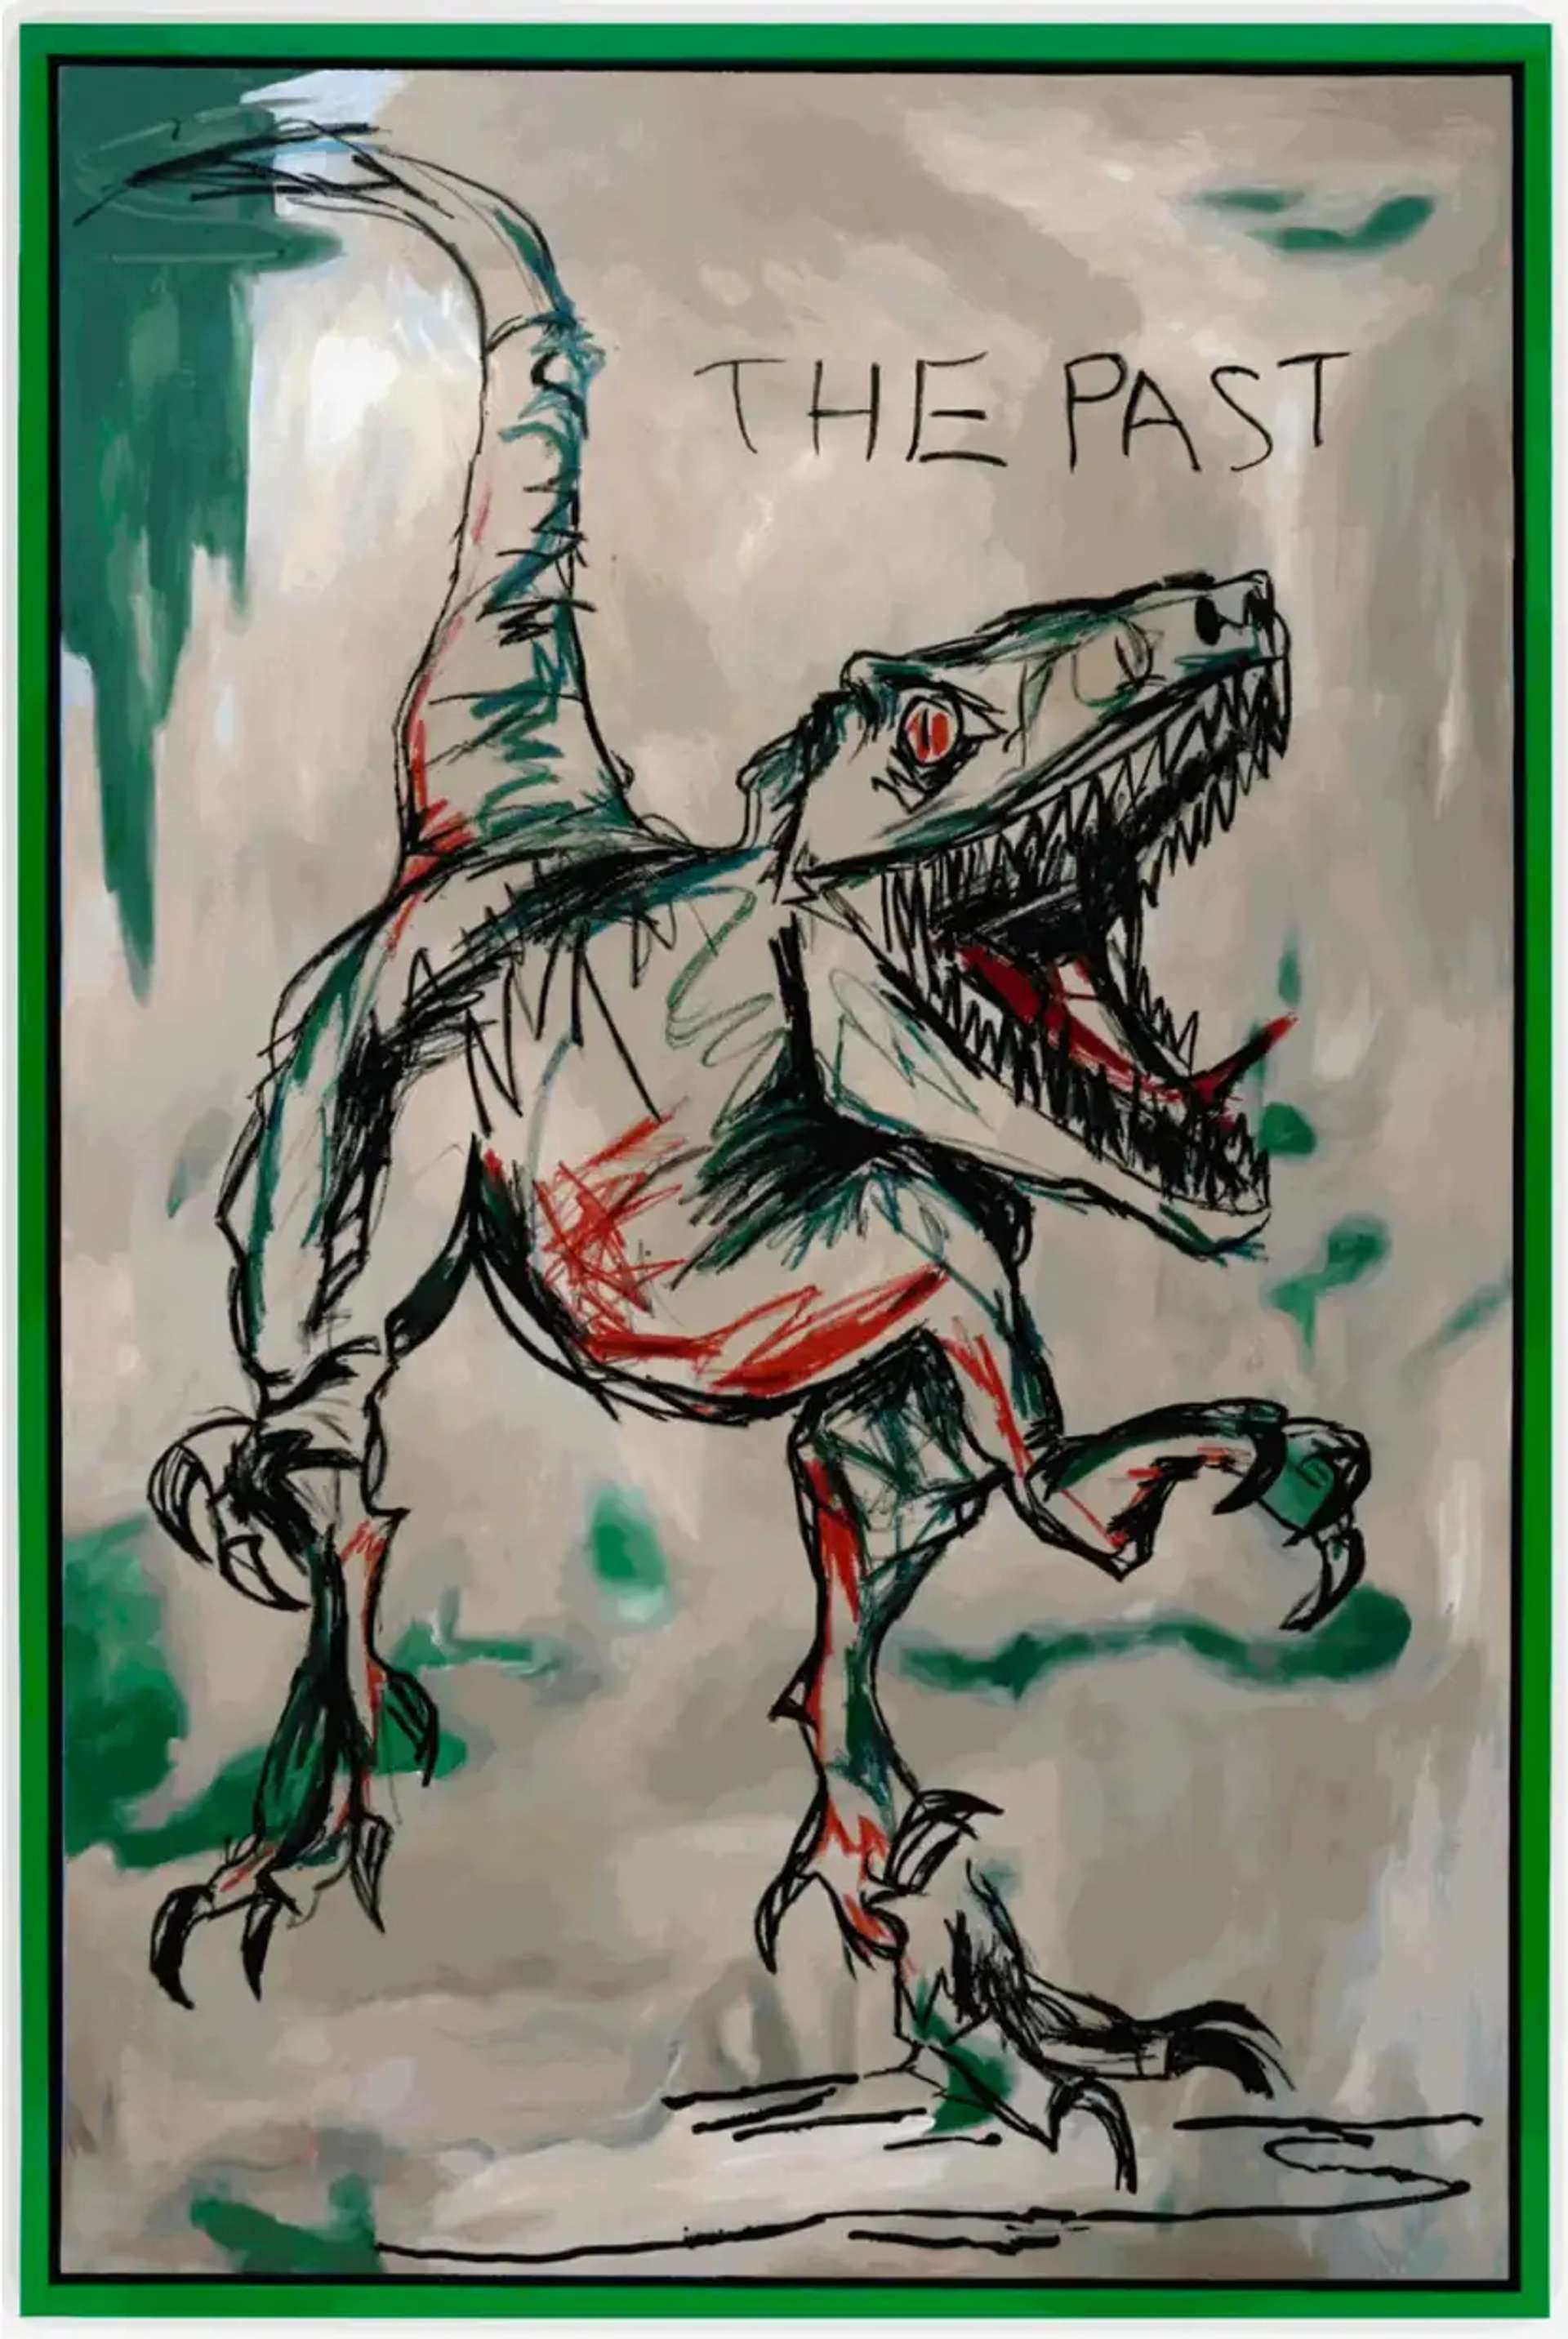 A drawn image of a T-Rex dinosaur seen from the front. The dinosaur's mouth is open, revealing its sharp teeth, and its tongue is hanging out. The dinosaur is depicted in black, with washed green and orange colors overlaid on the artwork. Above the dinosaur, the words "THE PAST" are written.